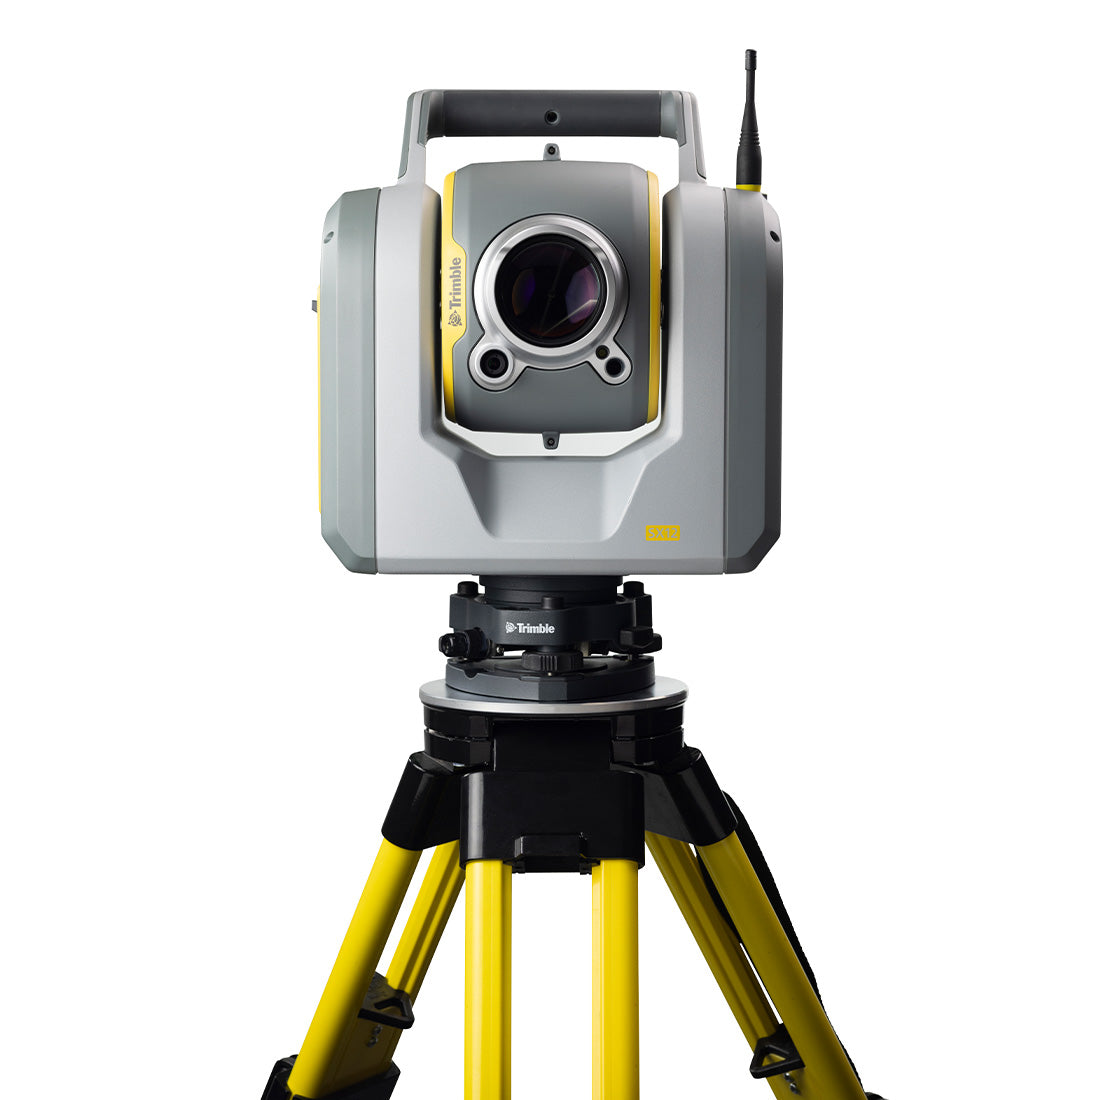 Trimble SX12 Scanning Total Station with Wi-Fi HaLow